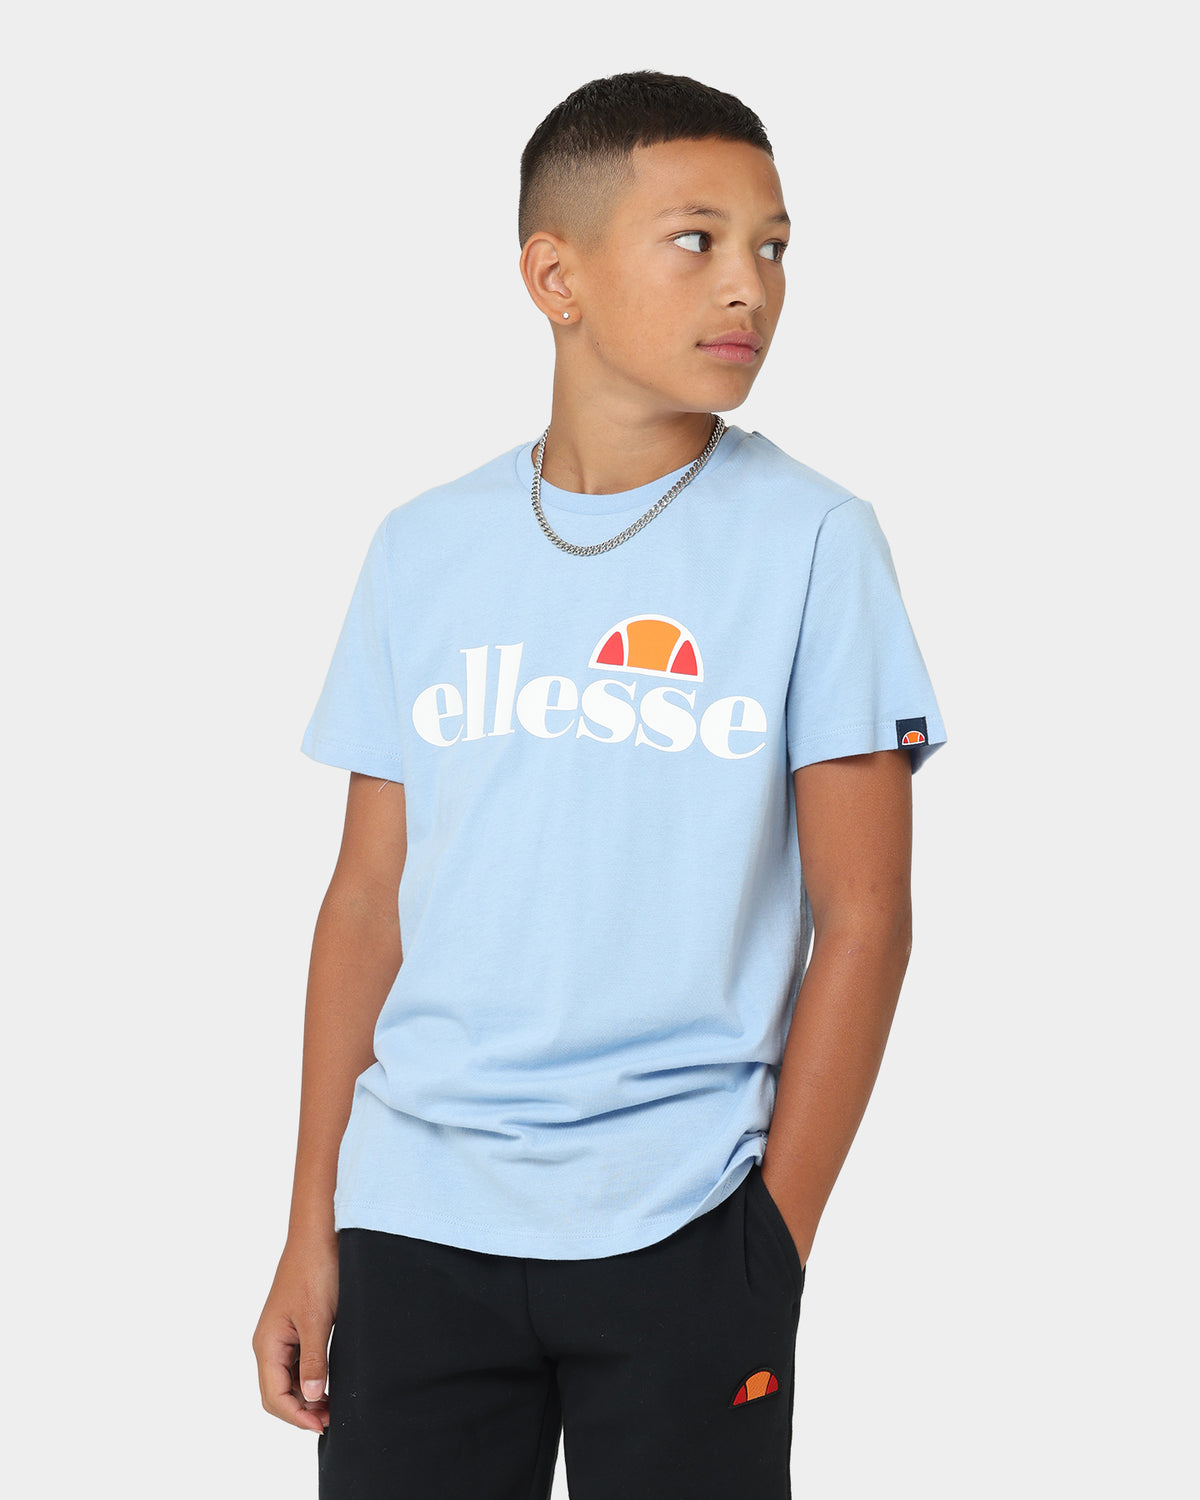 service Ellesse Light at Get top and products SAVE the affordable T-Shirt prices on Malia . BIG ELLESSE Blue Kids\'